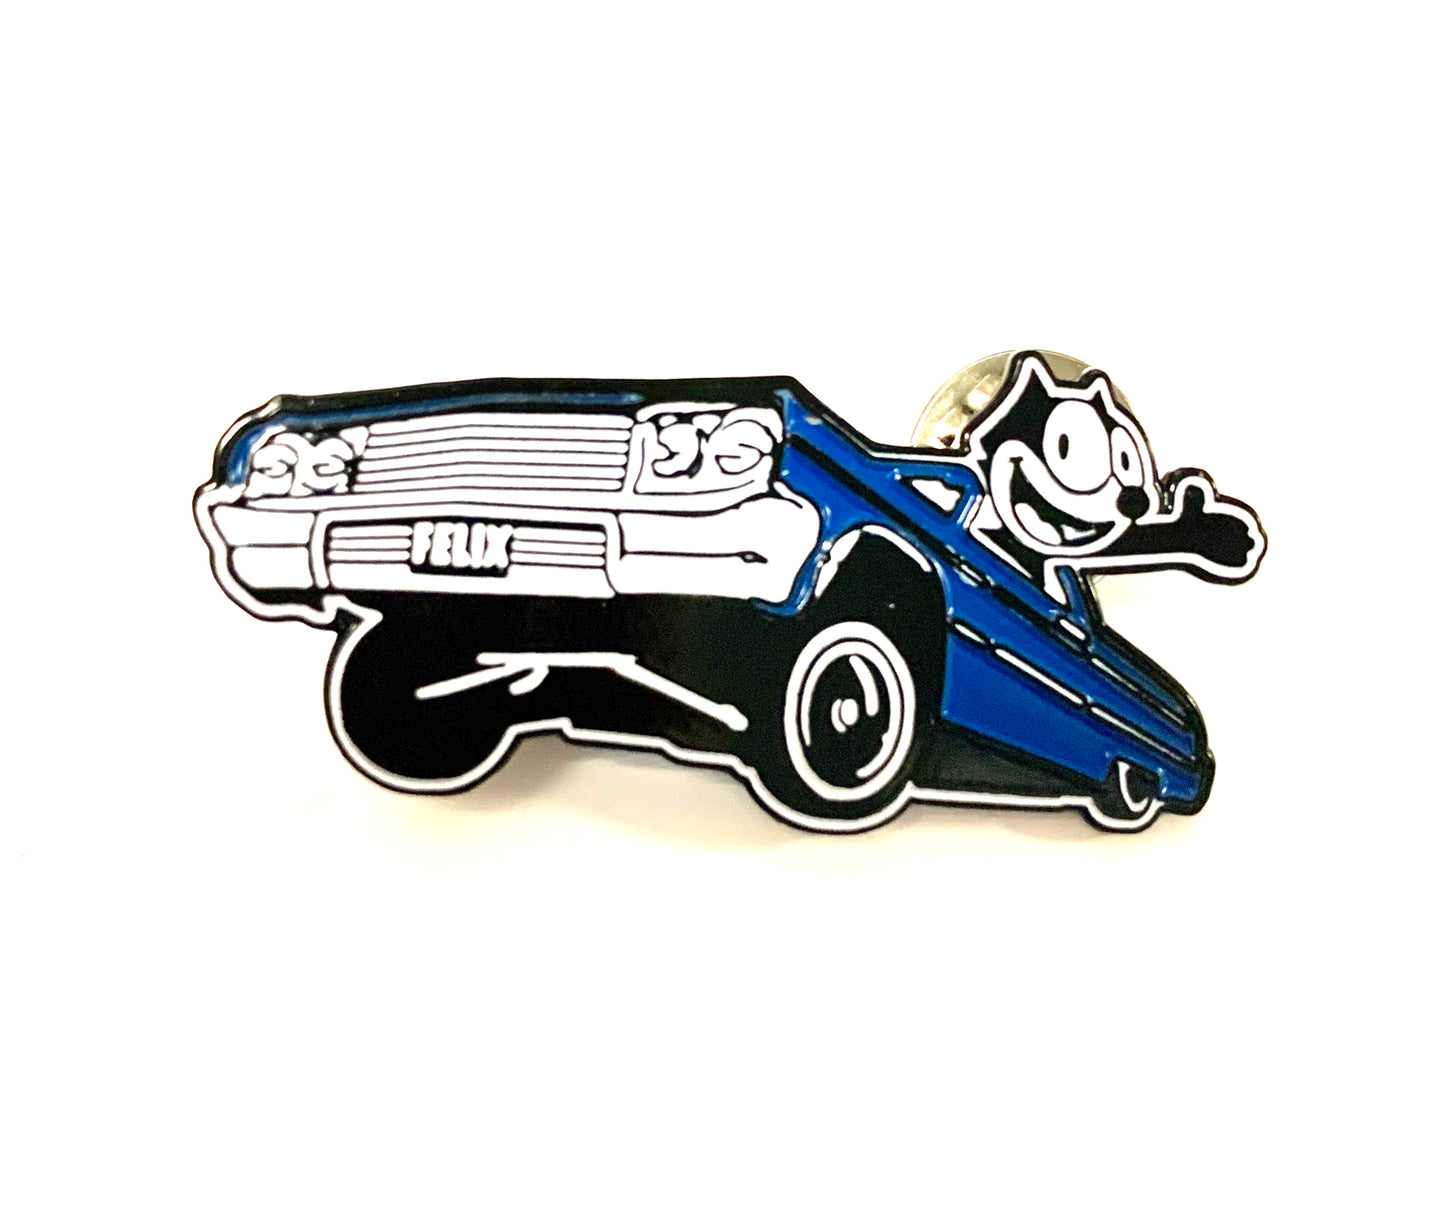 64 Low Rider Glow in the Dark Black and Blue Pin excluding Regular Red Pin